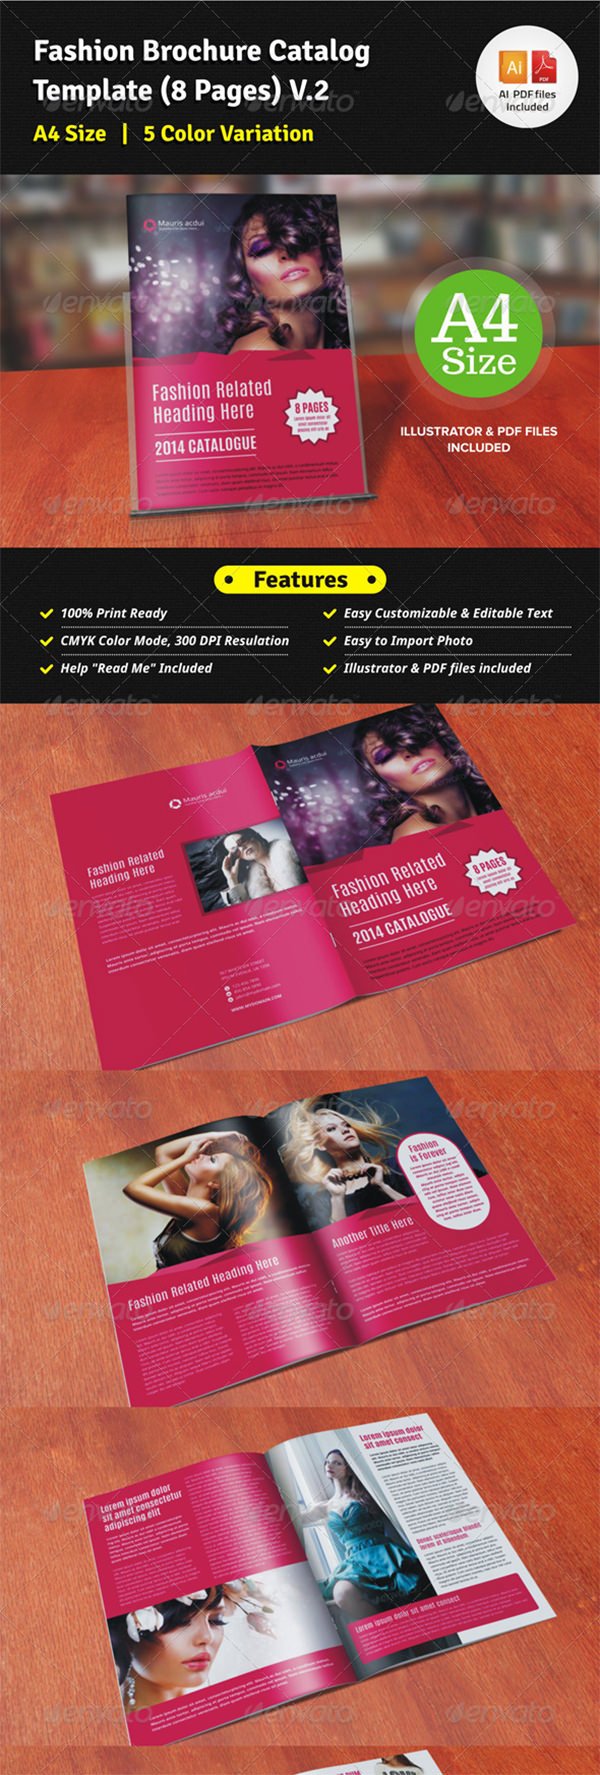 fashion-brochure-catalog-template-12-pages-v2